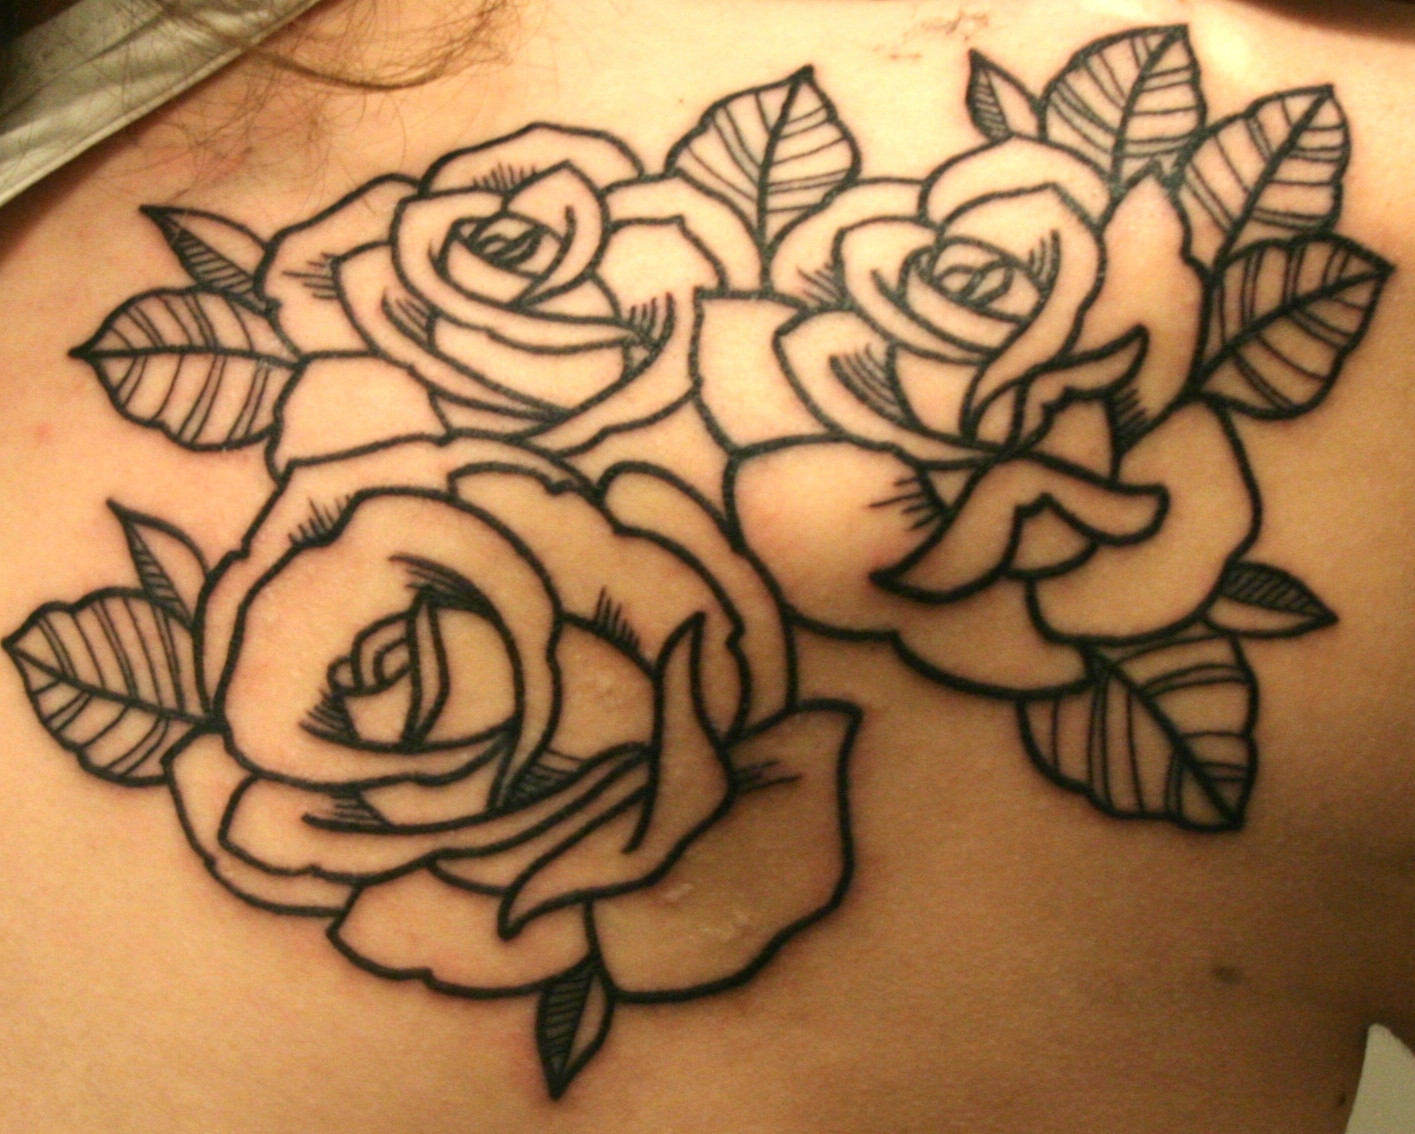 Awesome Inks Tattoo Ideas, Inspiration, and Information